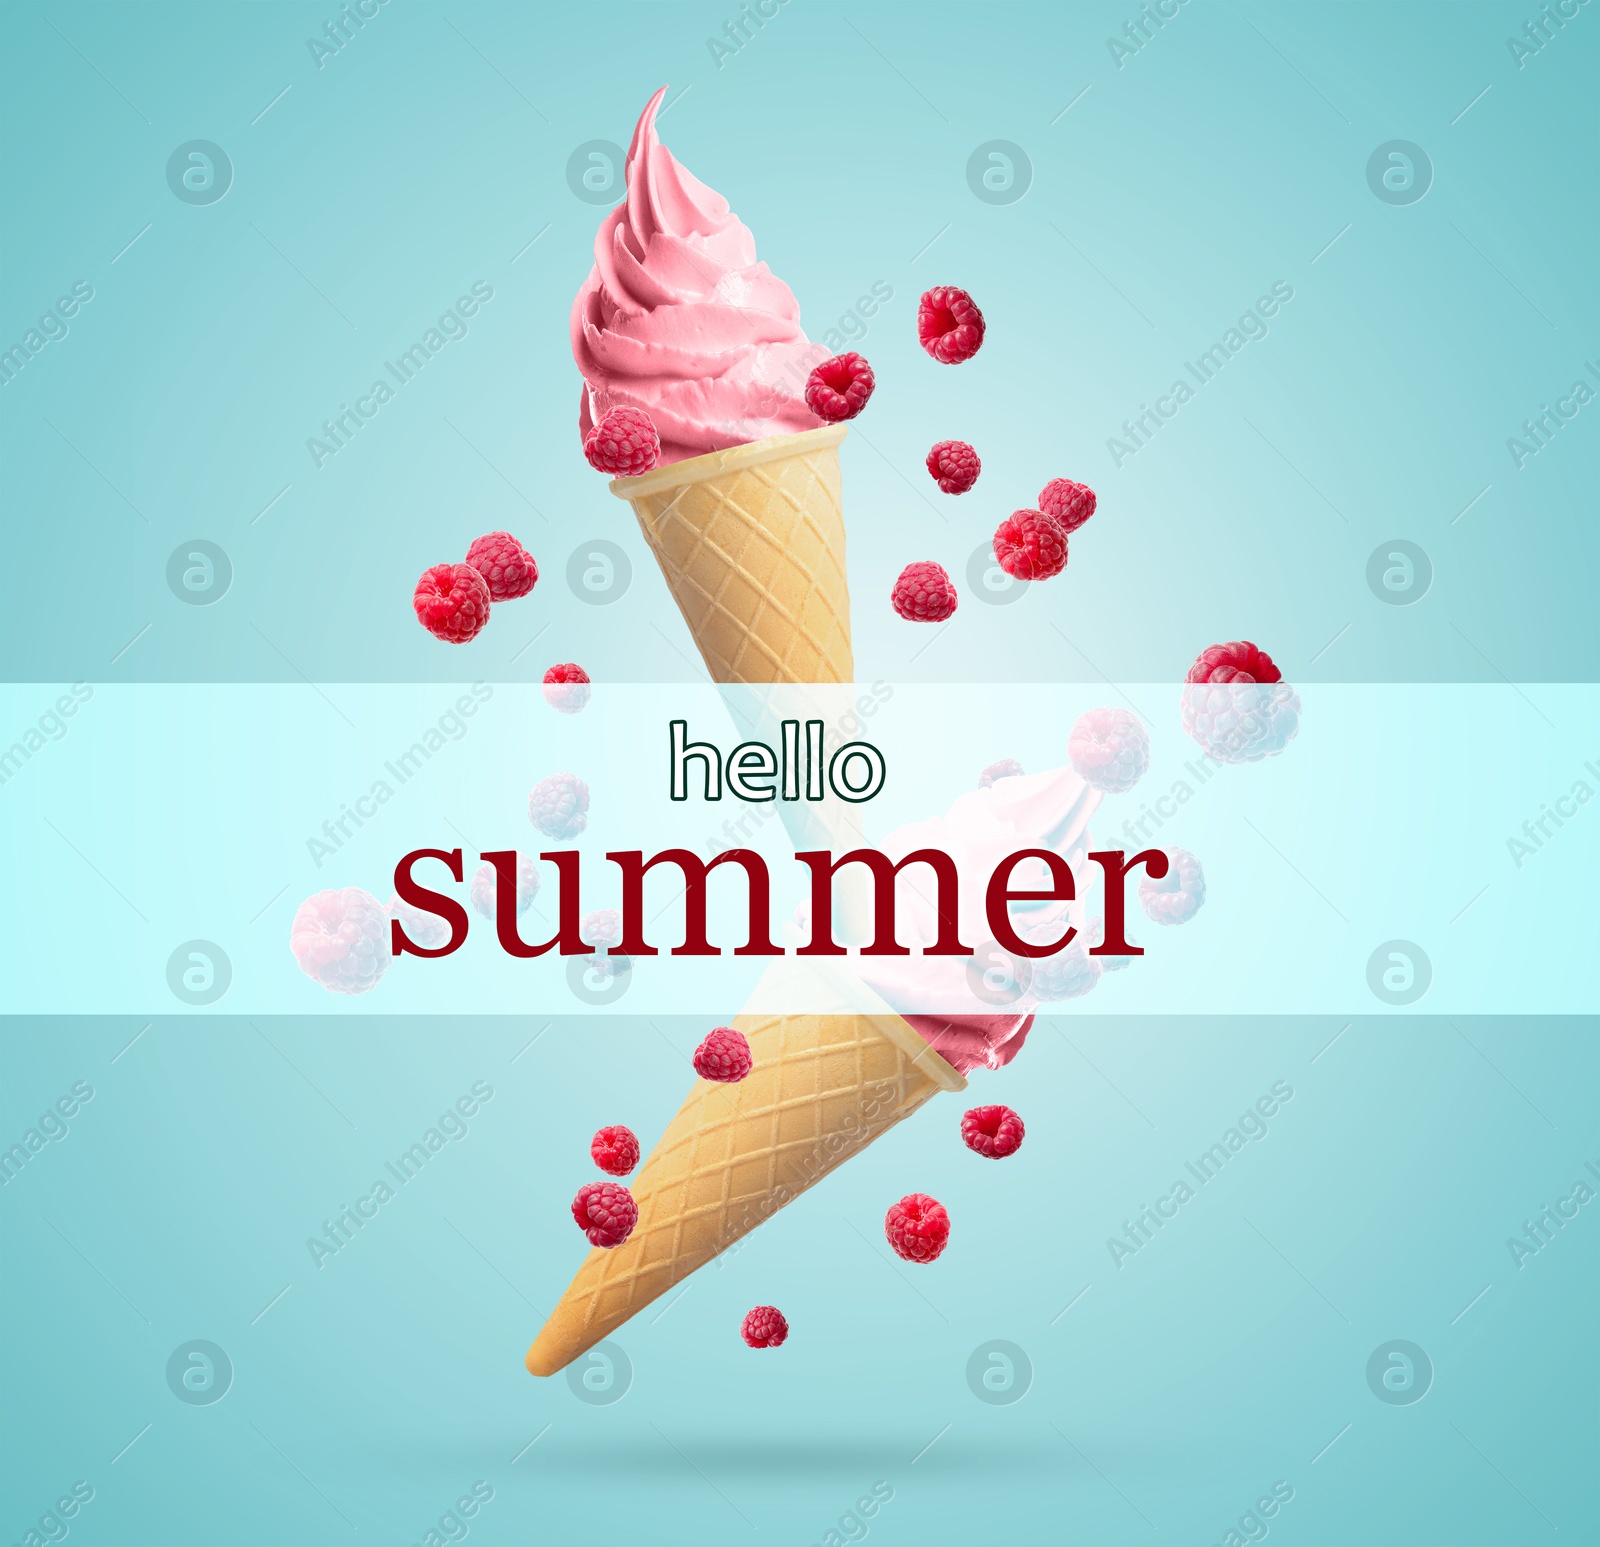 Image of Hello Summer. Tasty ice cream in crispy cones and raspberries in air on light blue background